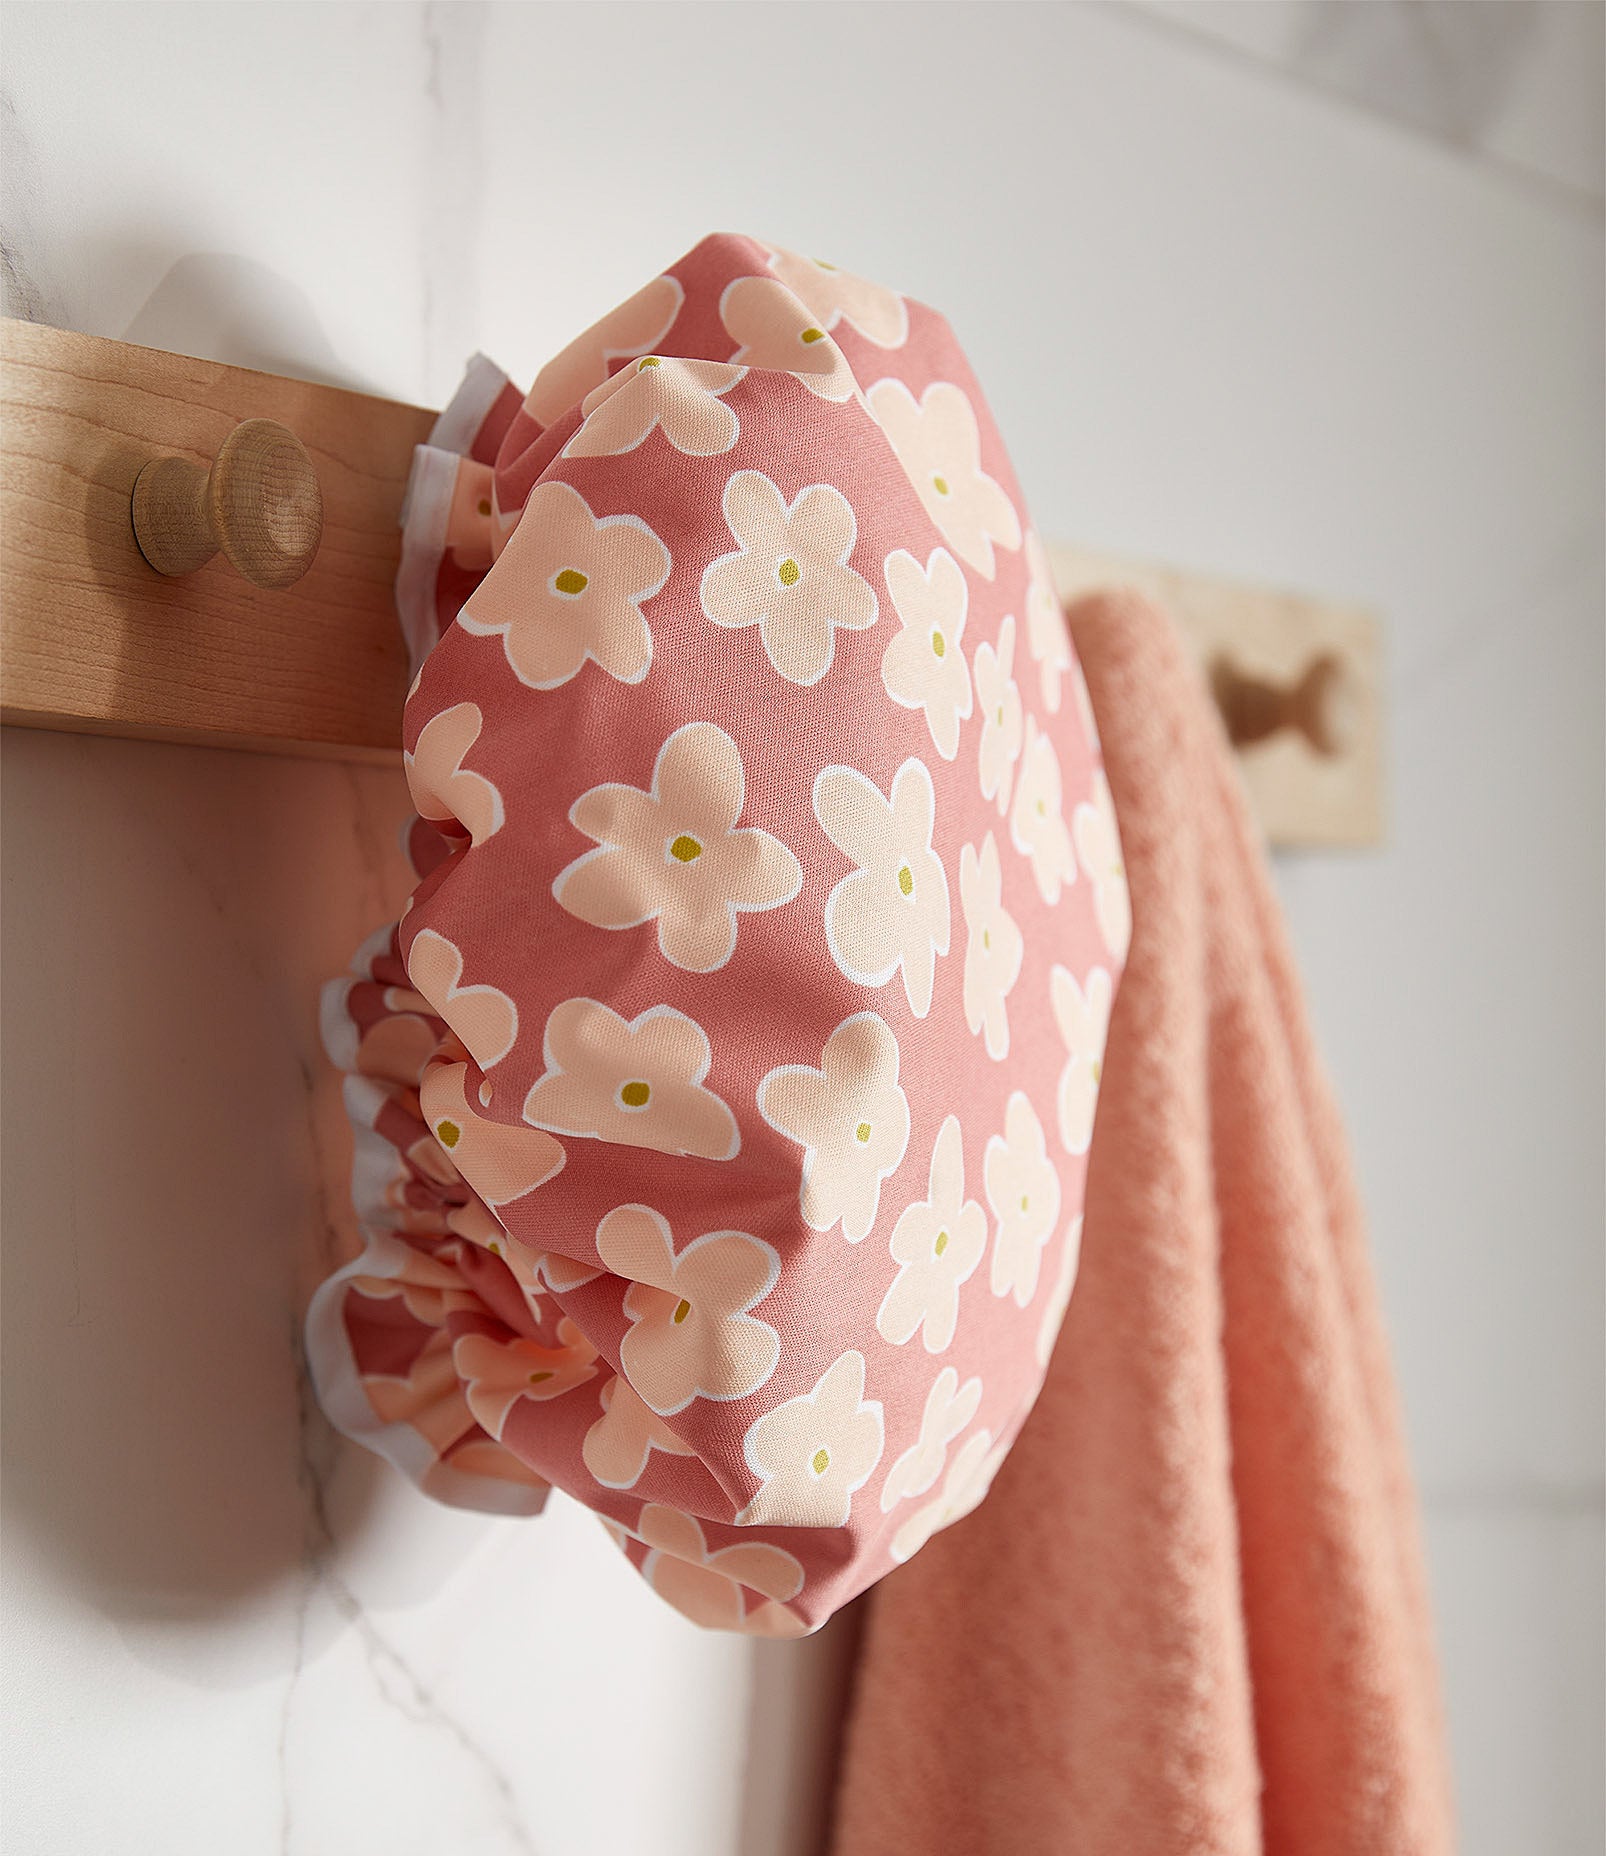 a floral shower cap hanging in a bathroom next to a towel